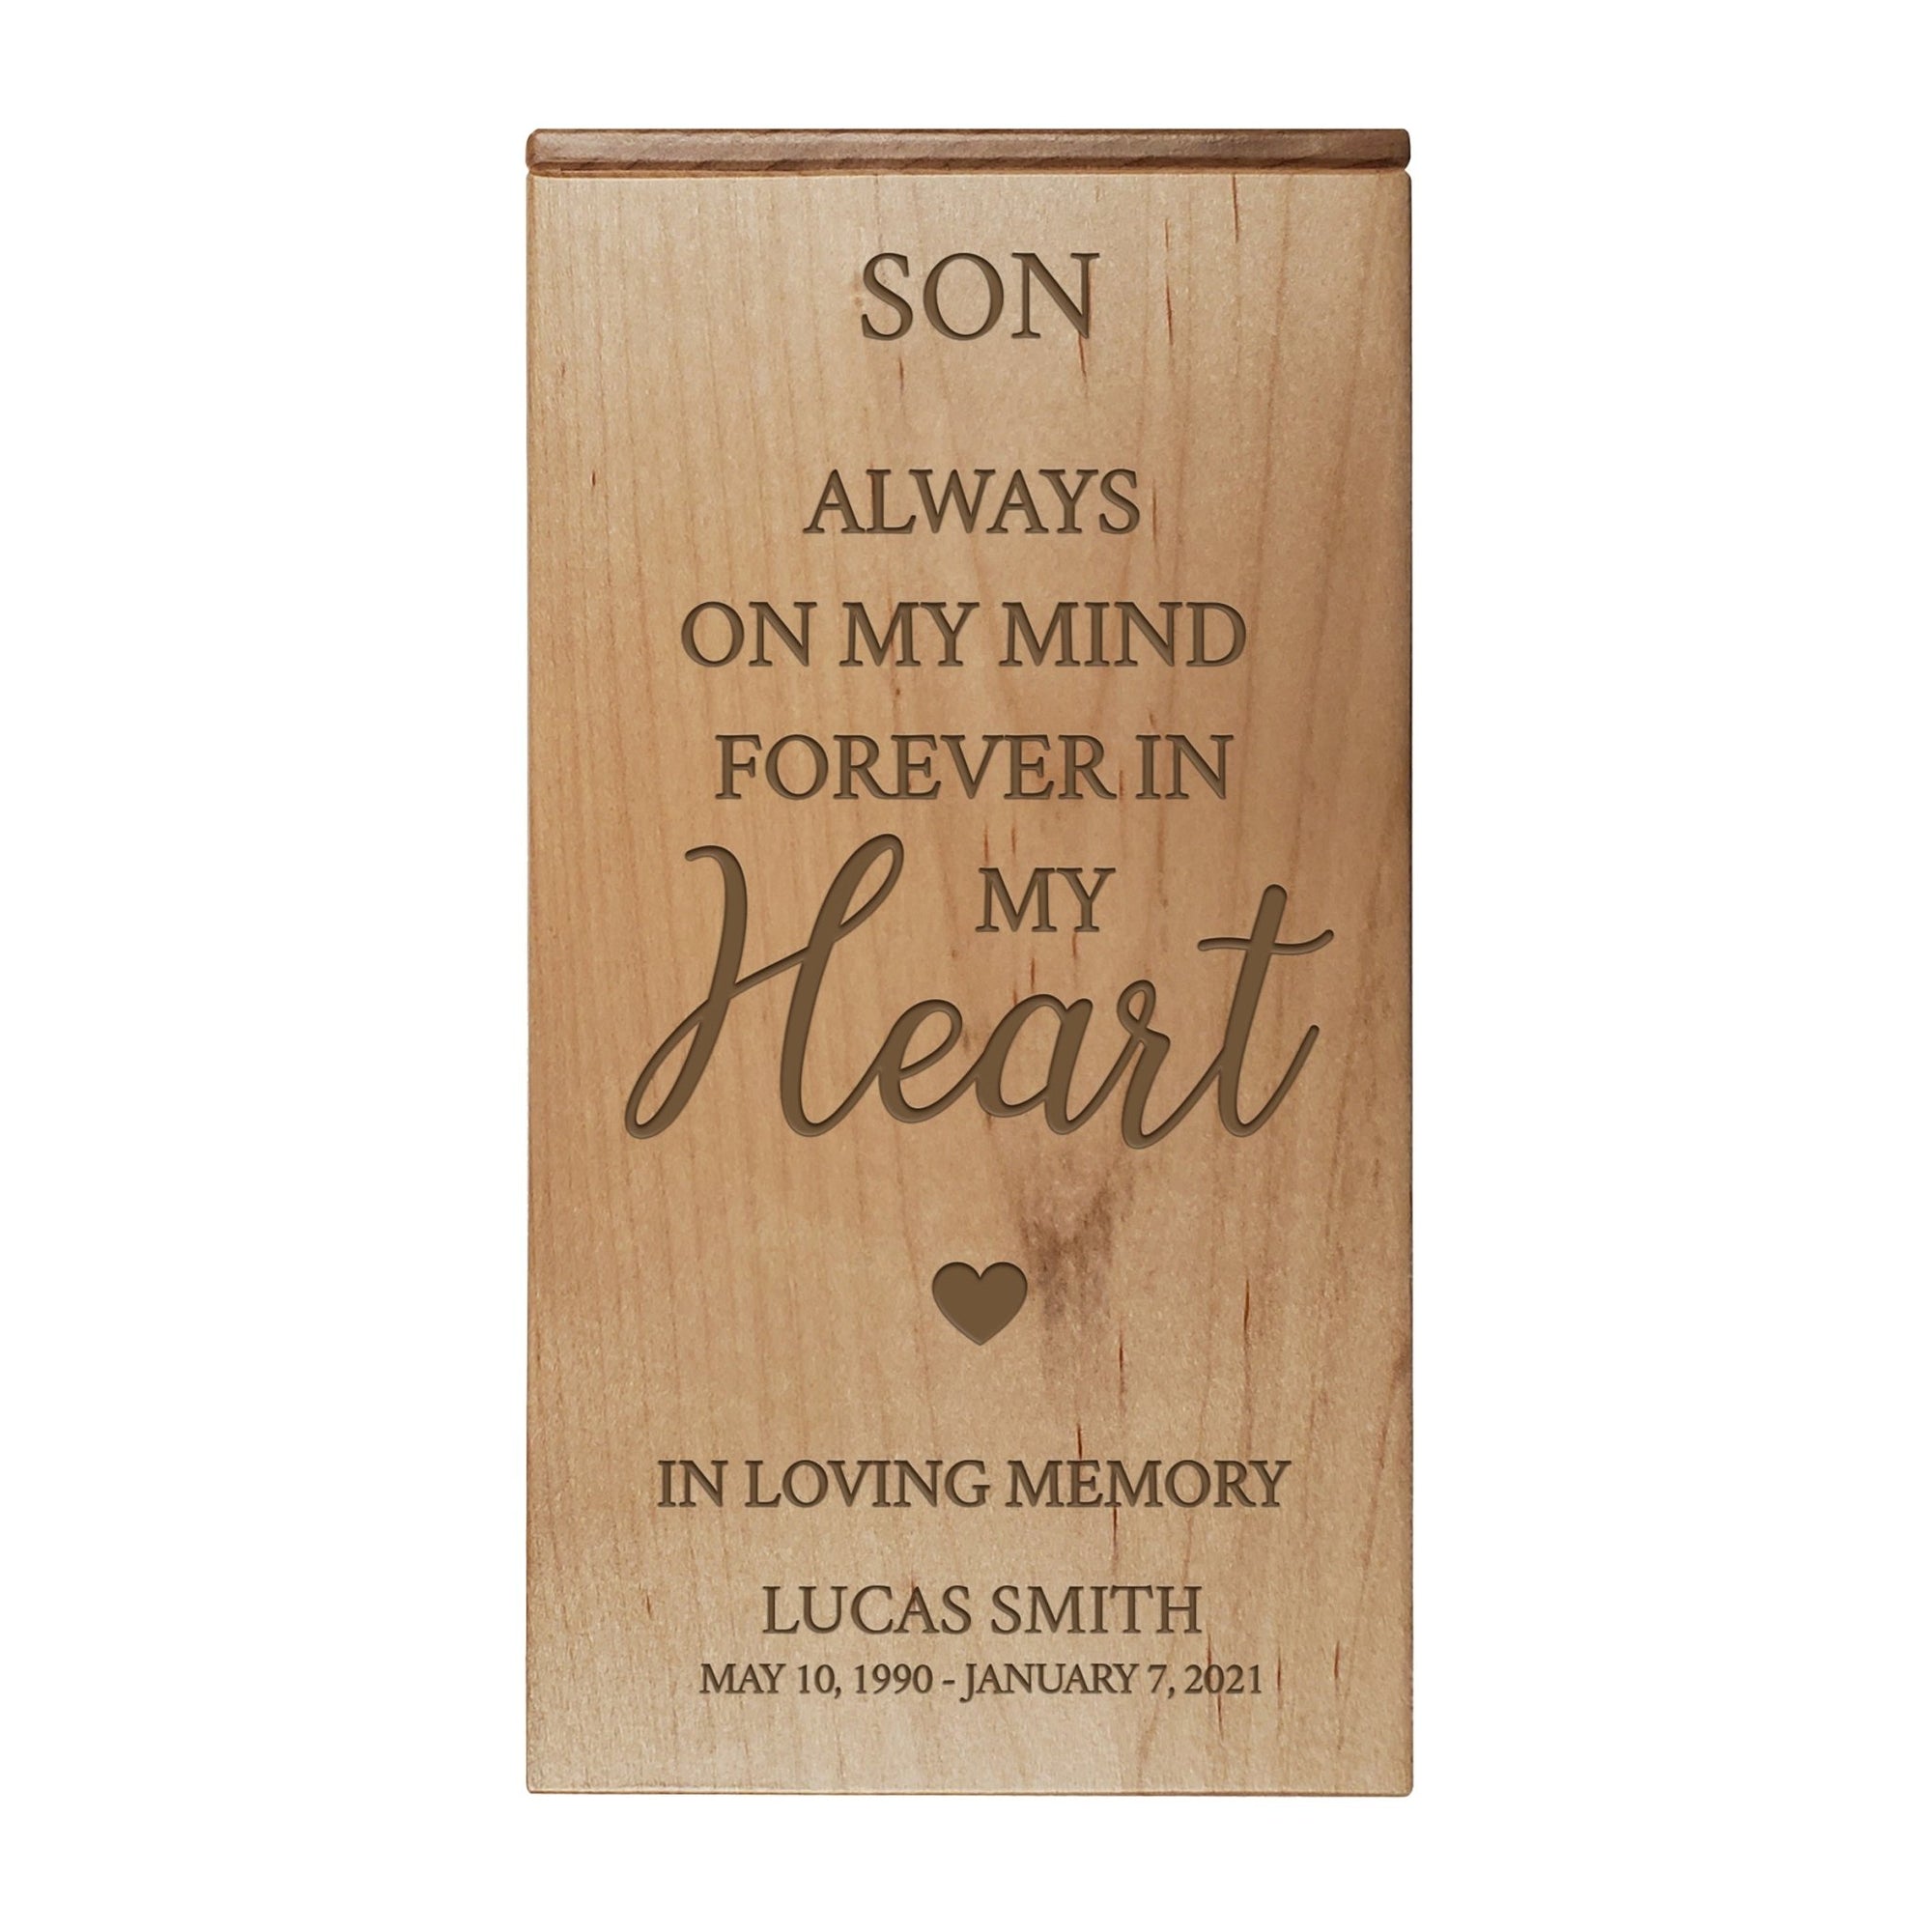 Custom Engraved Memorial Cremation Keepsake Urn Box holds 100 cu in of Ashes in - Son, Always On My Mind - LifeSong Milestones